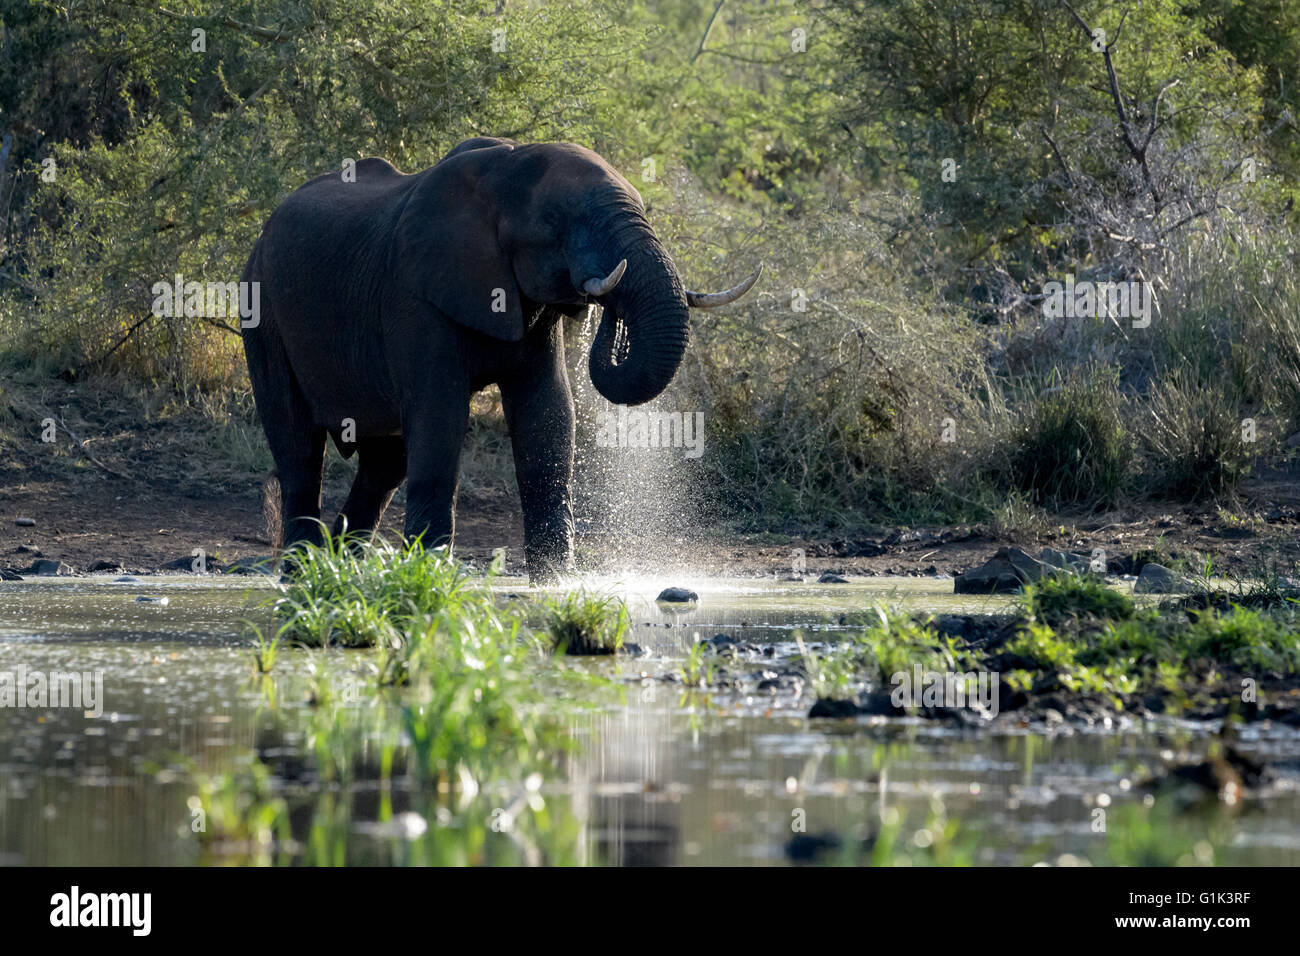 African Elephant (Loxodonta africana) drinking water, backlit, Kruger National Park, South Africa Stock Photo